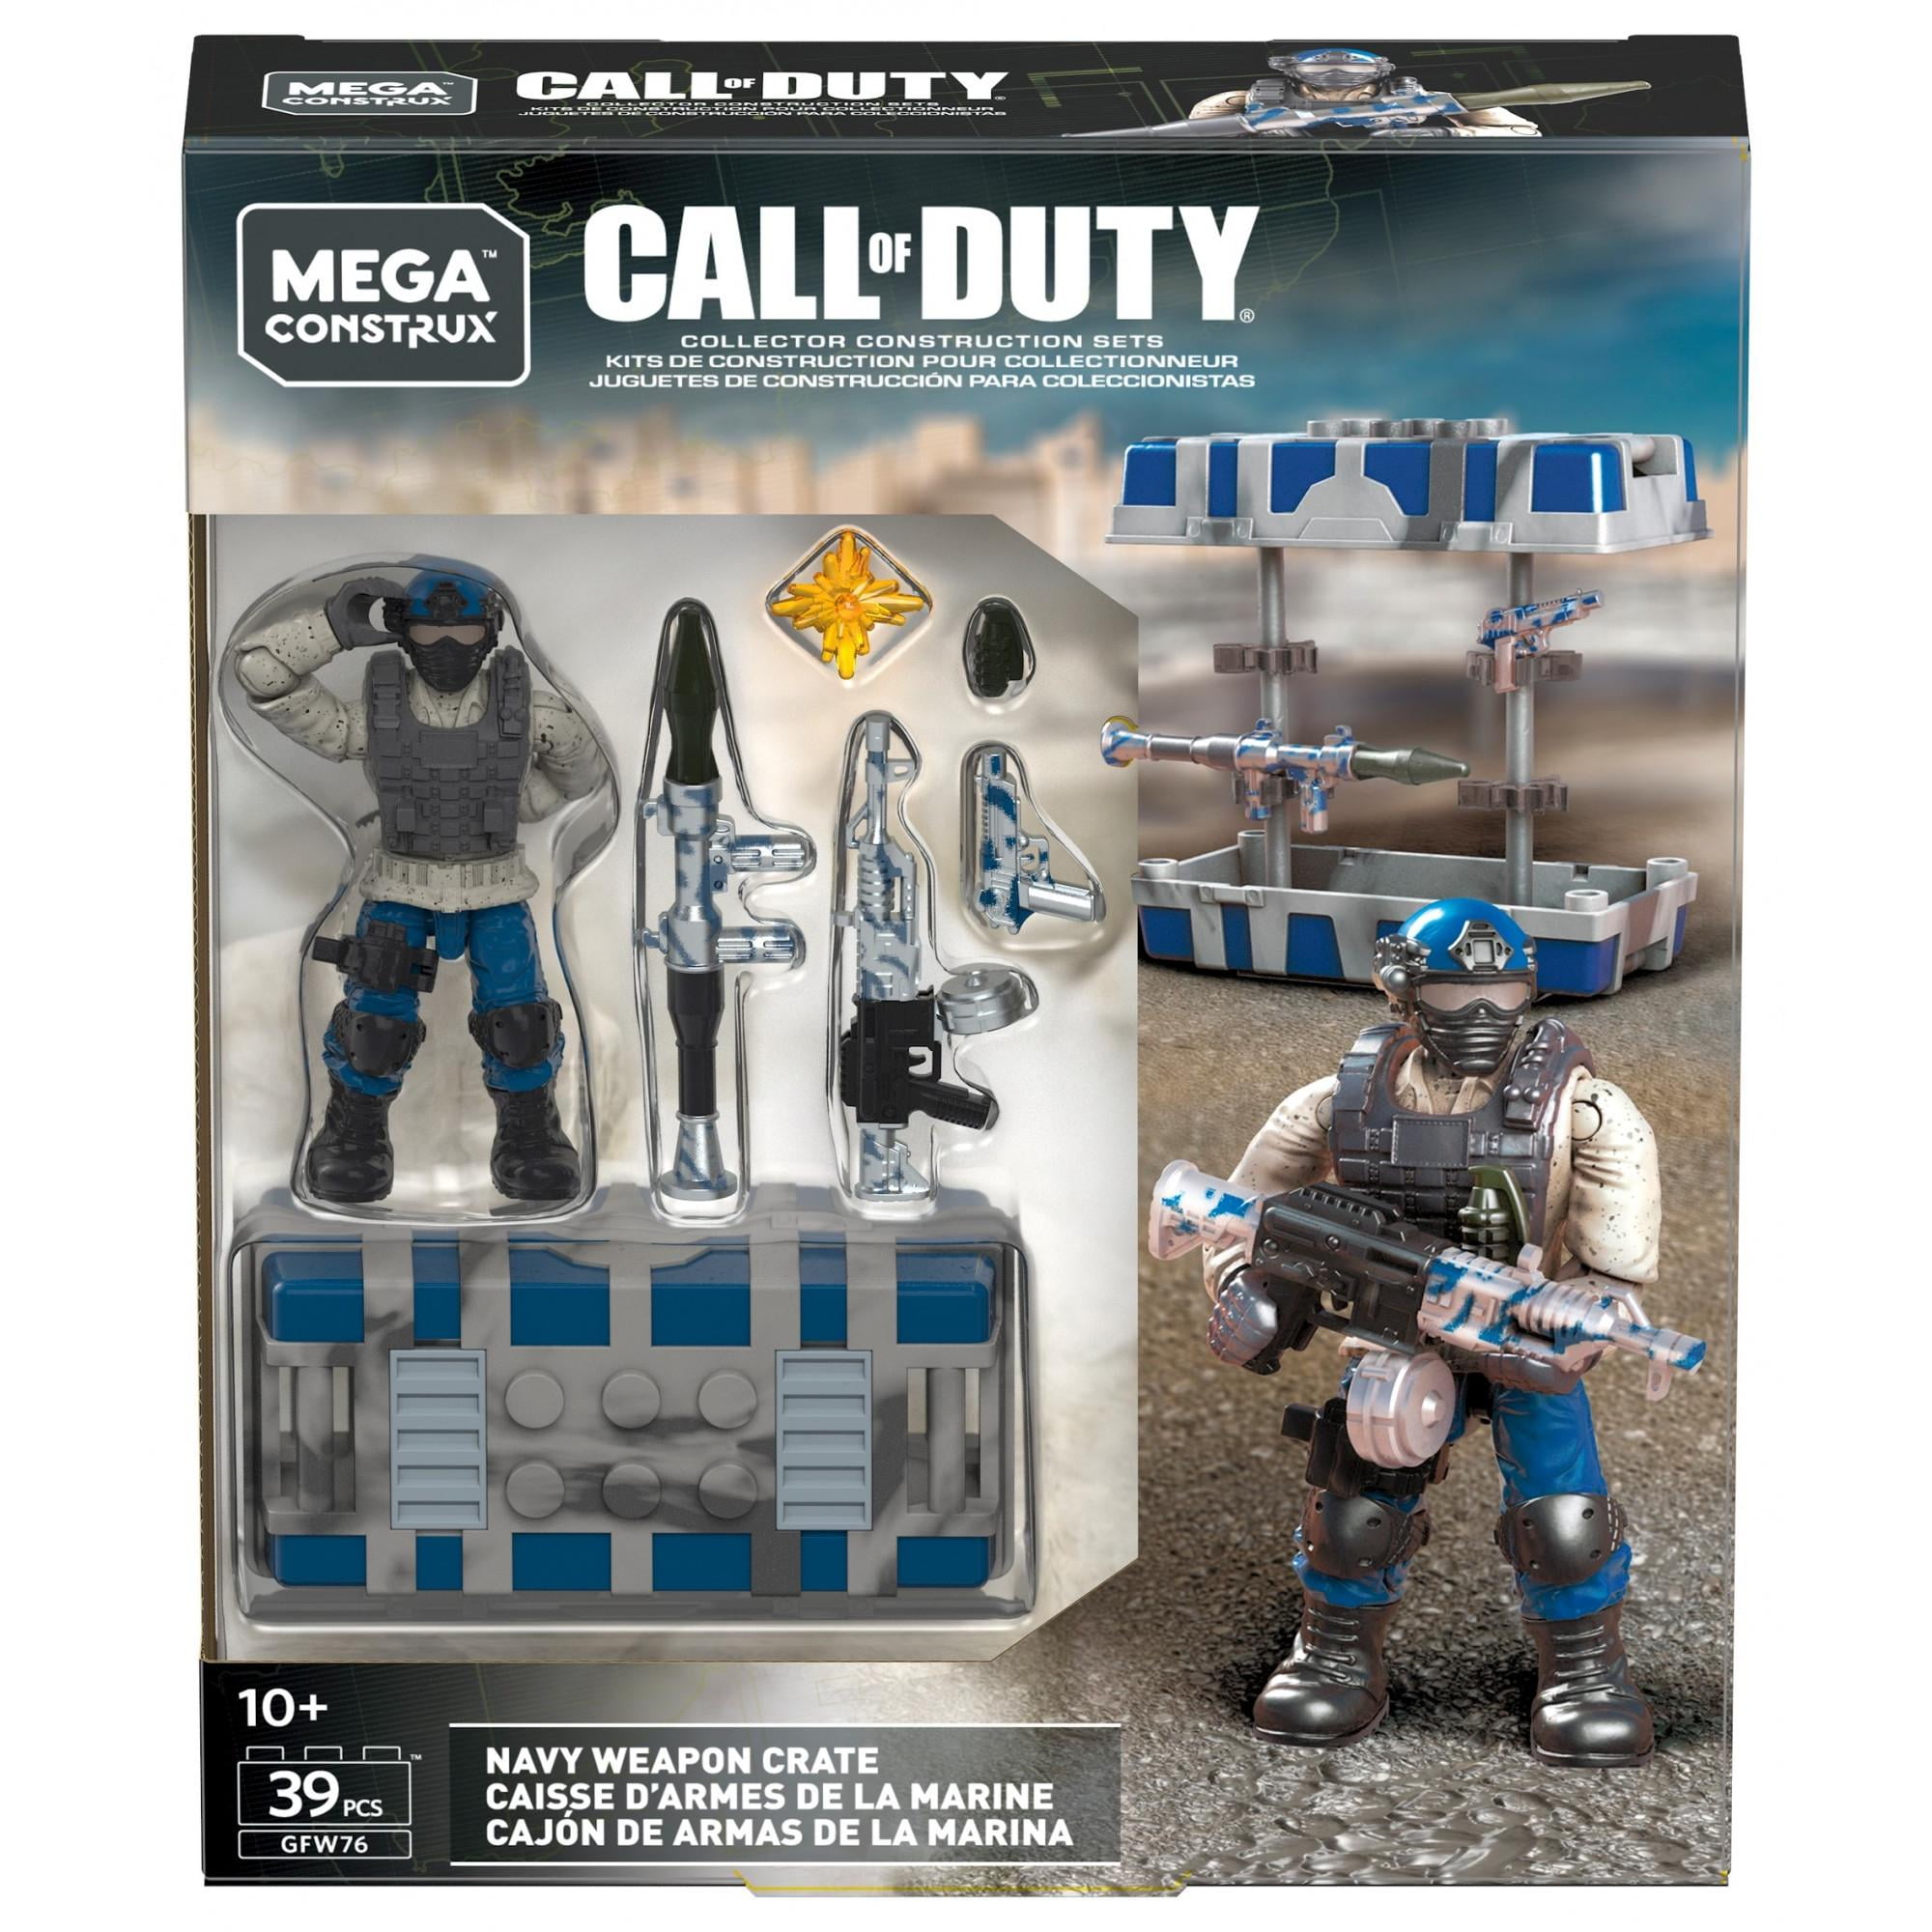 MEGA Construx Call of Duty Navy Weapon Crate Collectors 39 Pcs GFW76 Fvf98 for sale online 